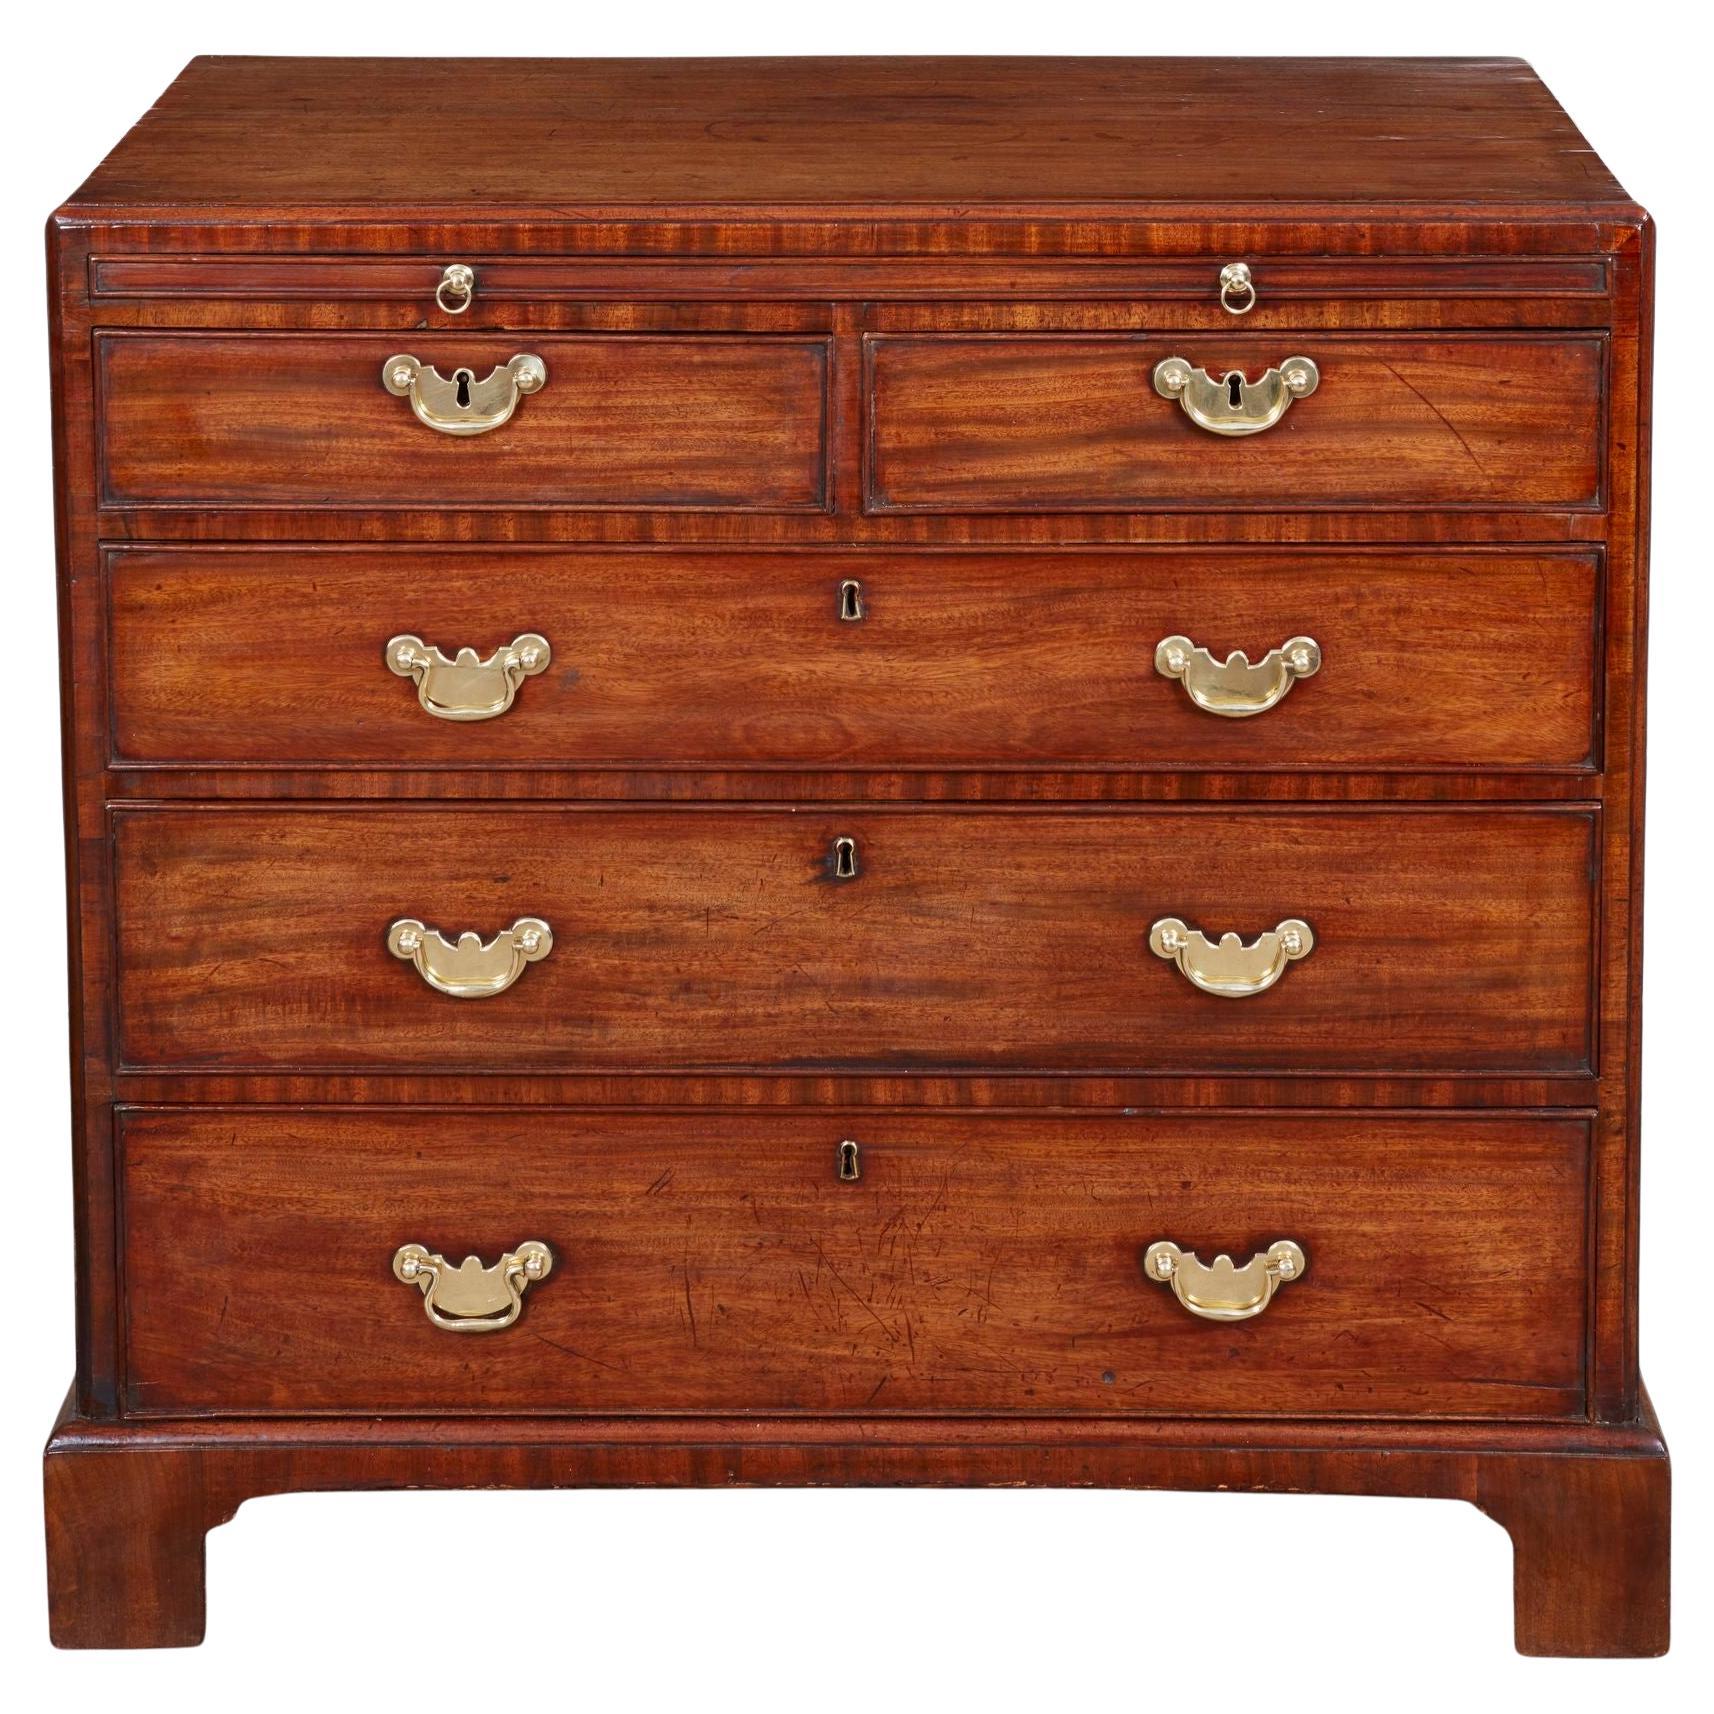 Georgian Caddy Top Bachelor's Chest For Sale